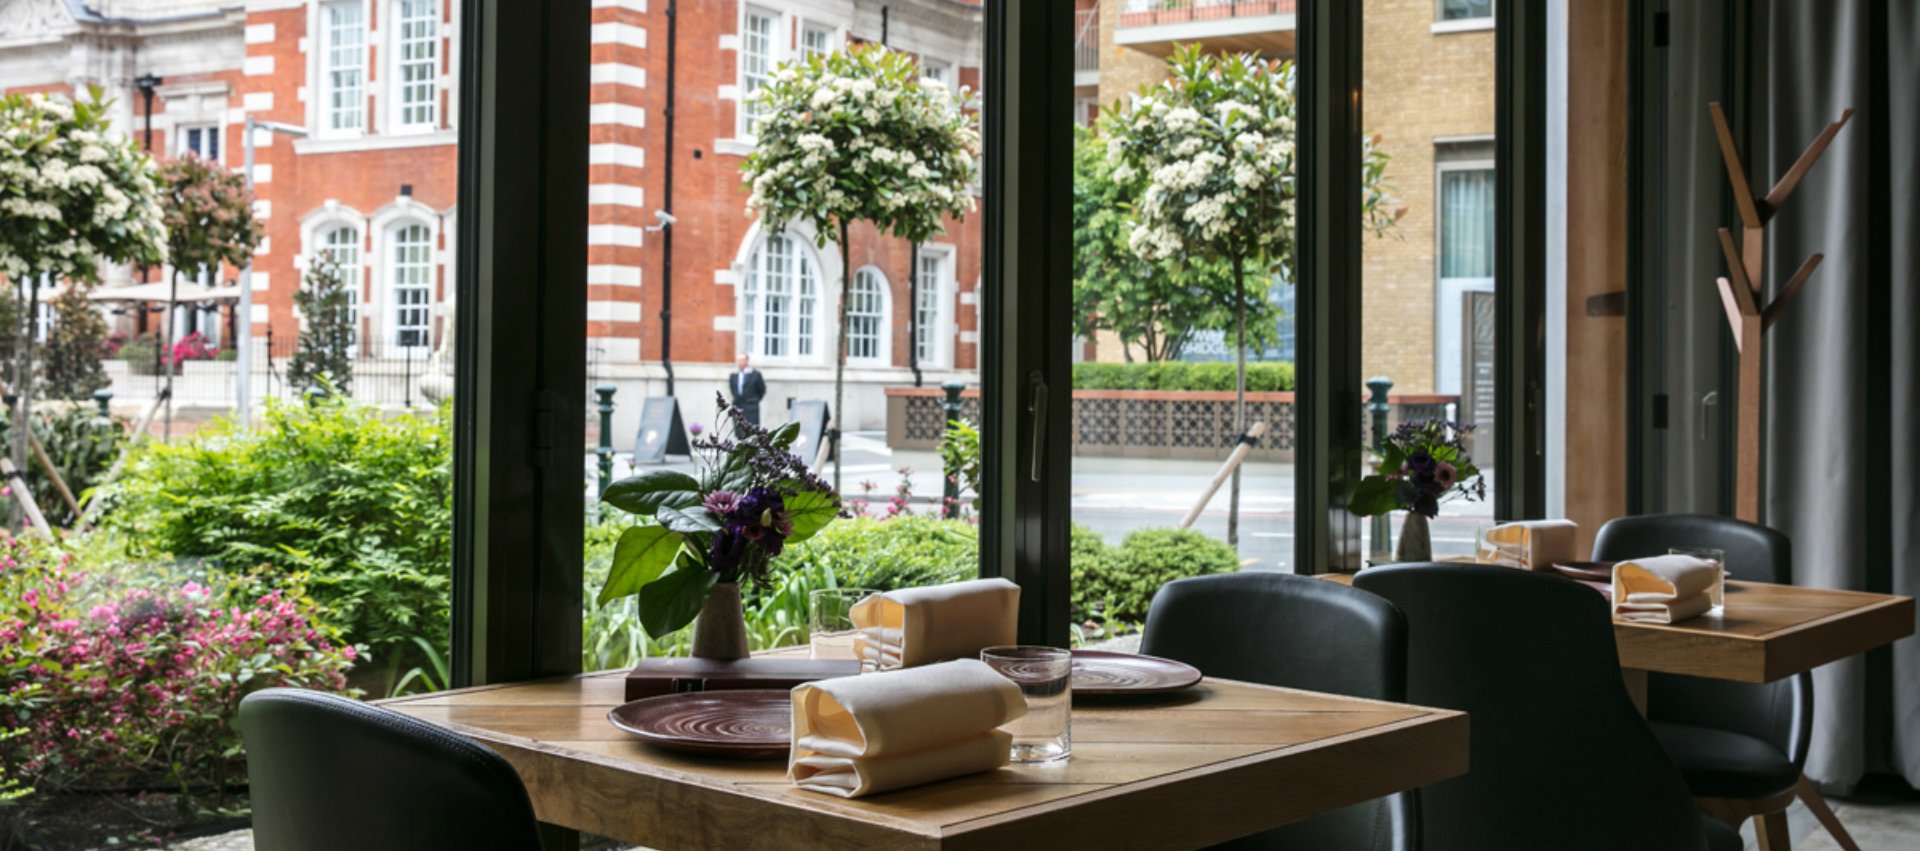 Best Restaurants In South London | Handpicked By The Nudge